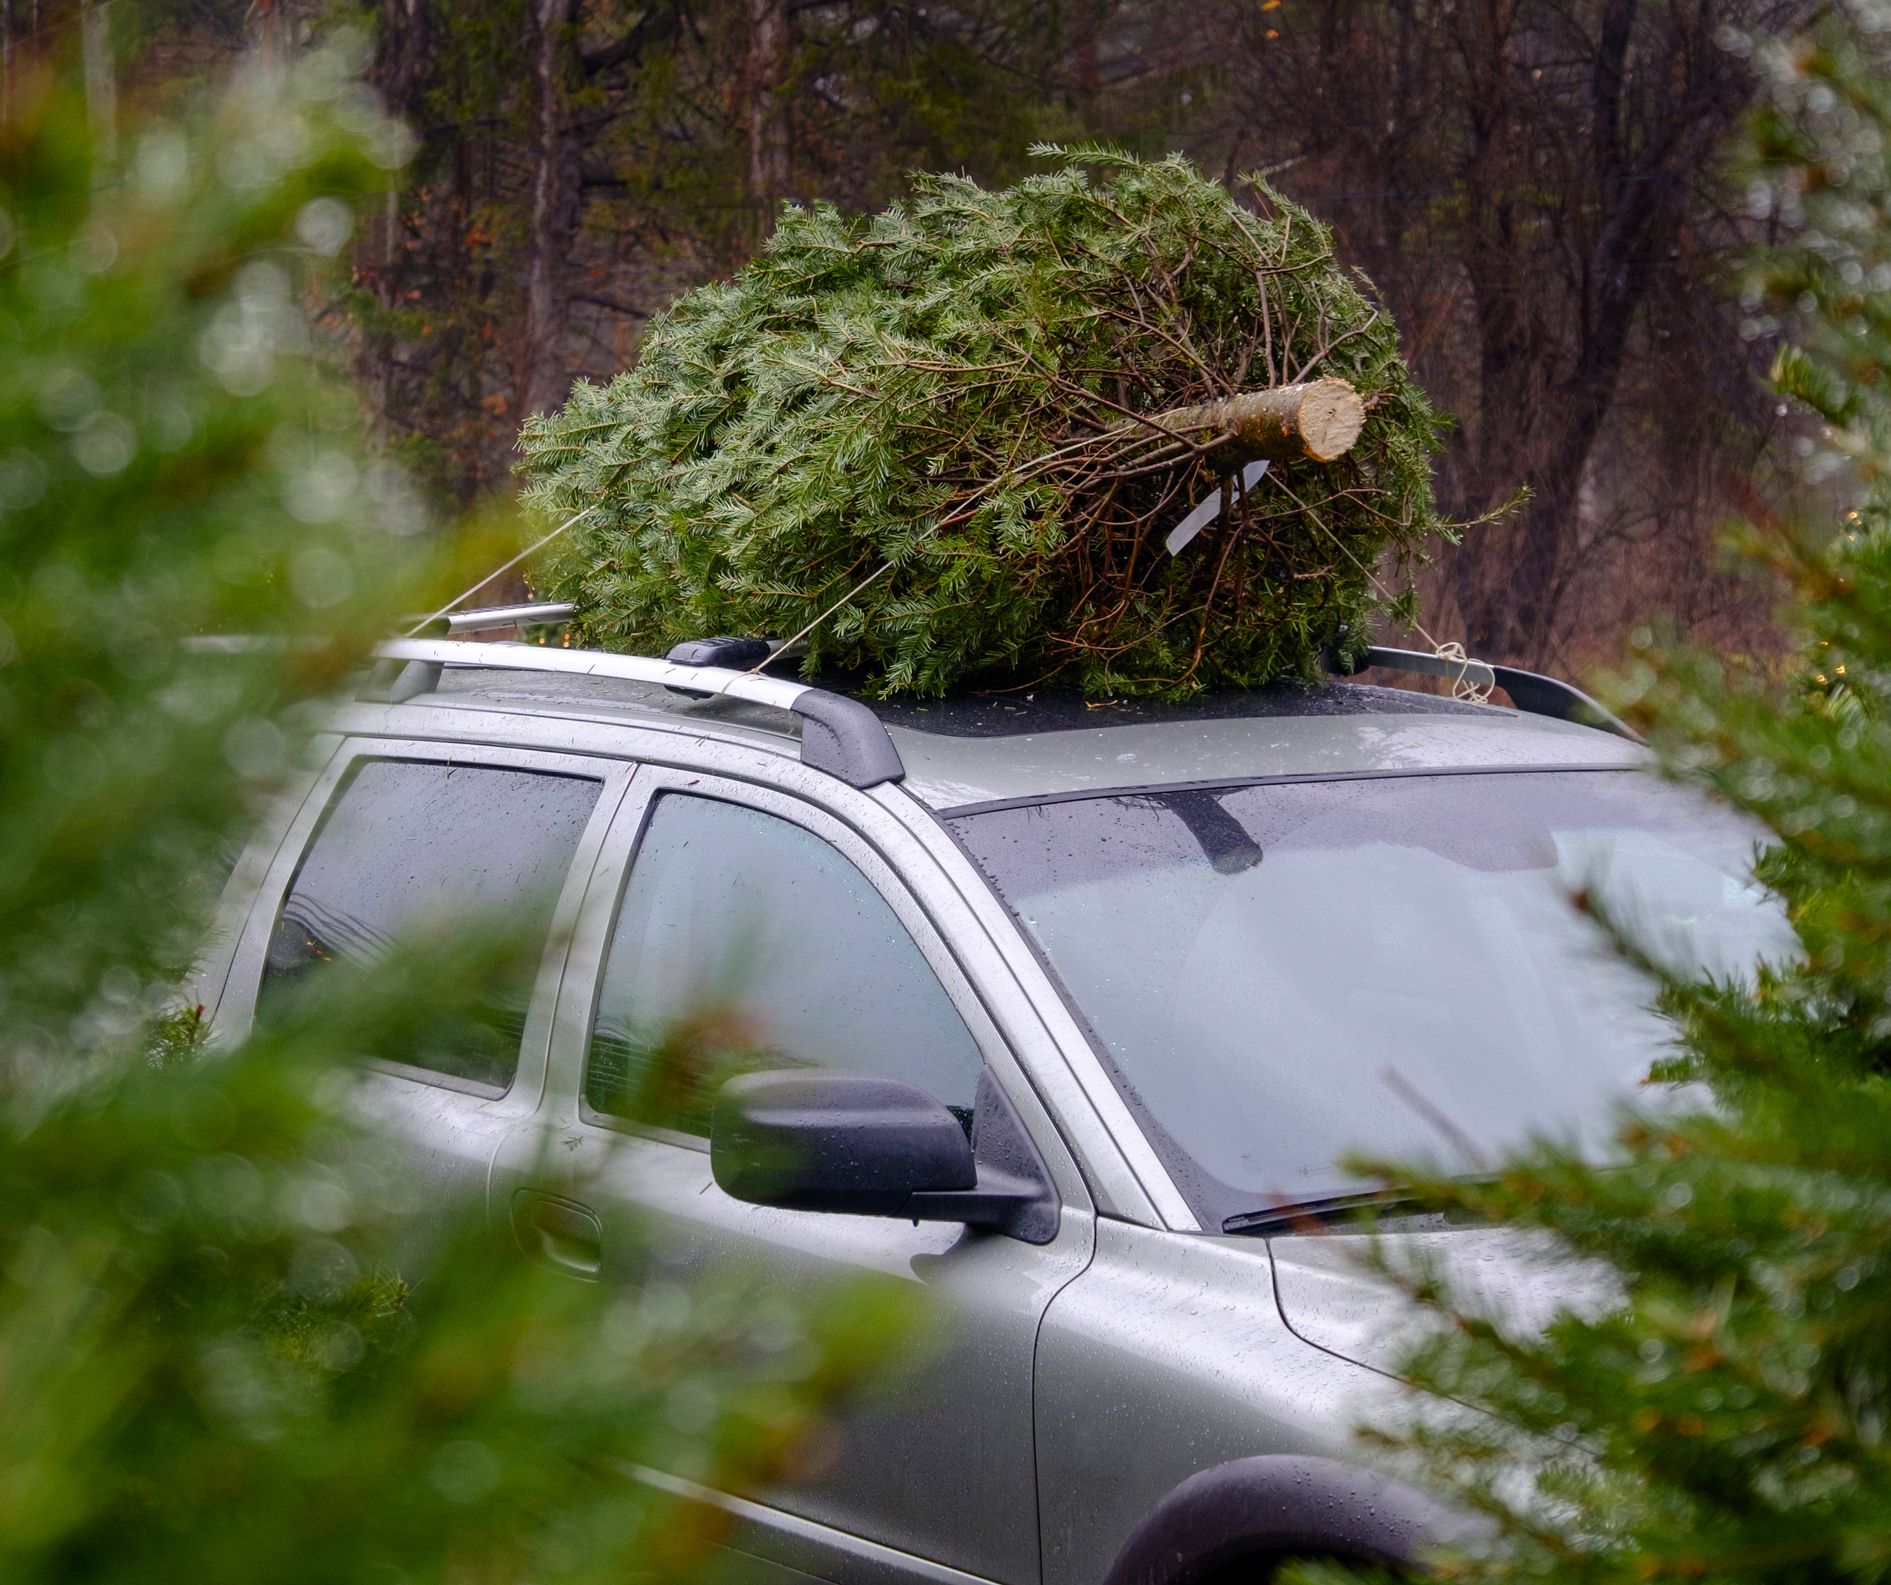 Carrying a Christmas Tree on the Car? There's a Right and a Wrong Way